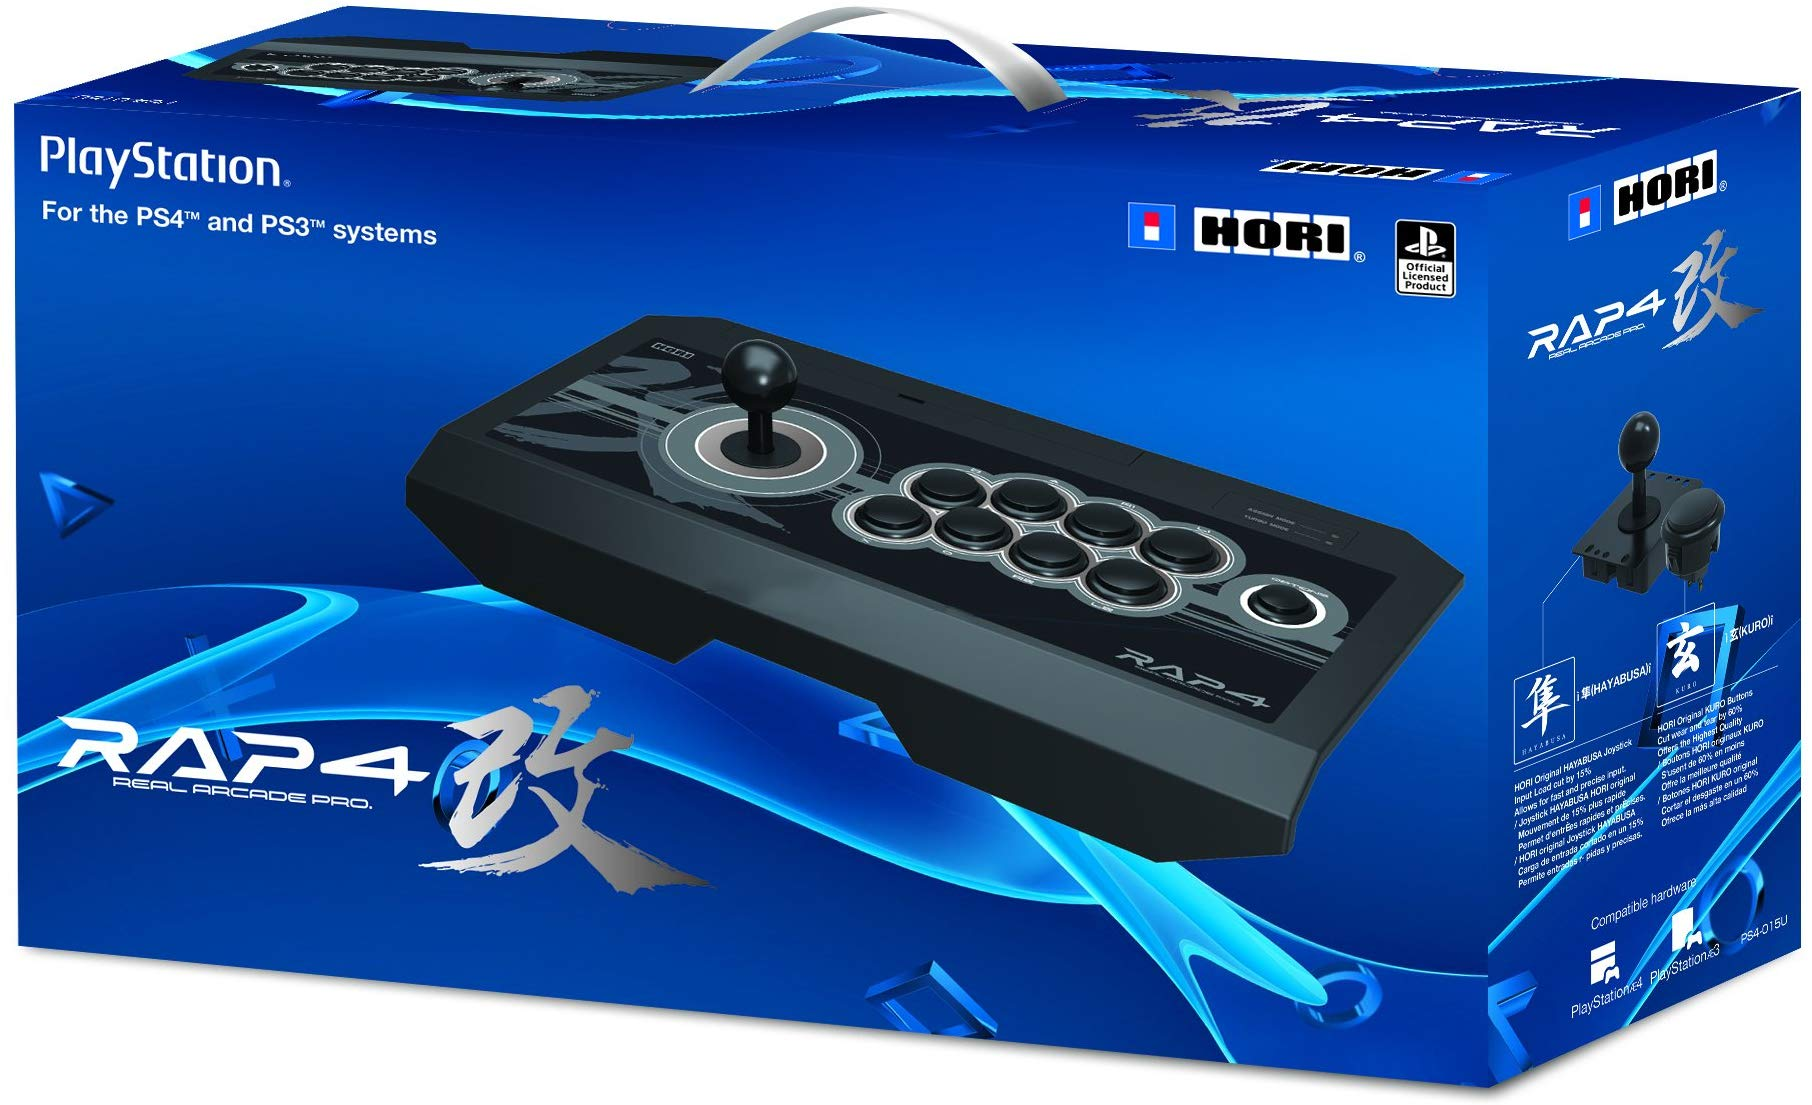 If you're into fighting games like Street Fighter V, you're going to want a nice arcade stick. Hori is known for making really good ones<br><br>Hadouken your way to victory <a href="https://amzn.to/2pOML8U" target="_blank" "nofollow">here</a>.